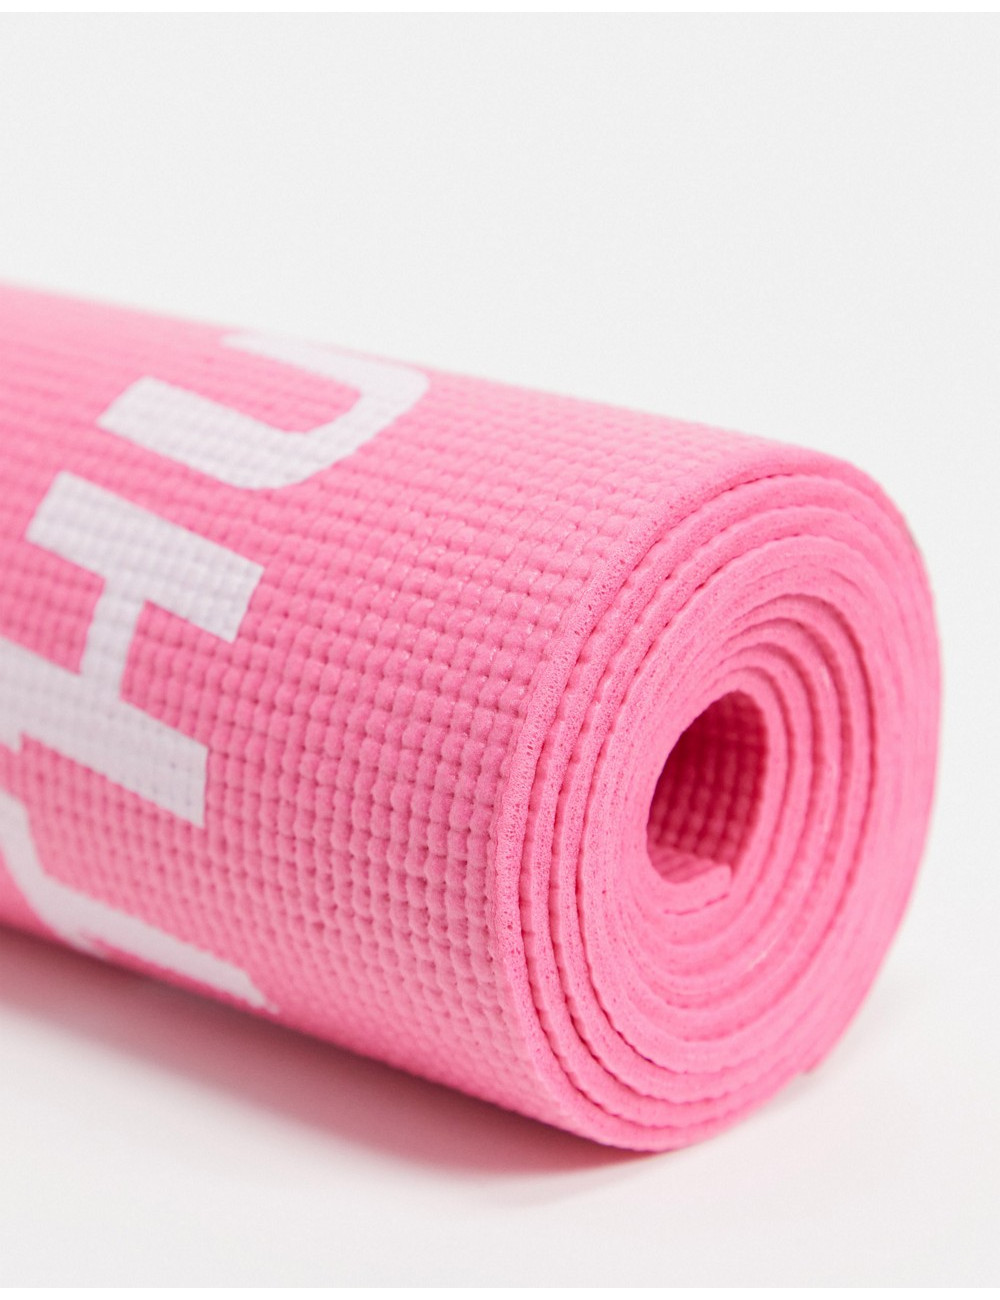 FitHut yoga mat in pink